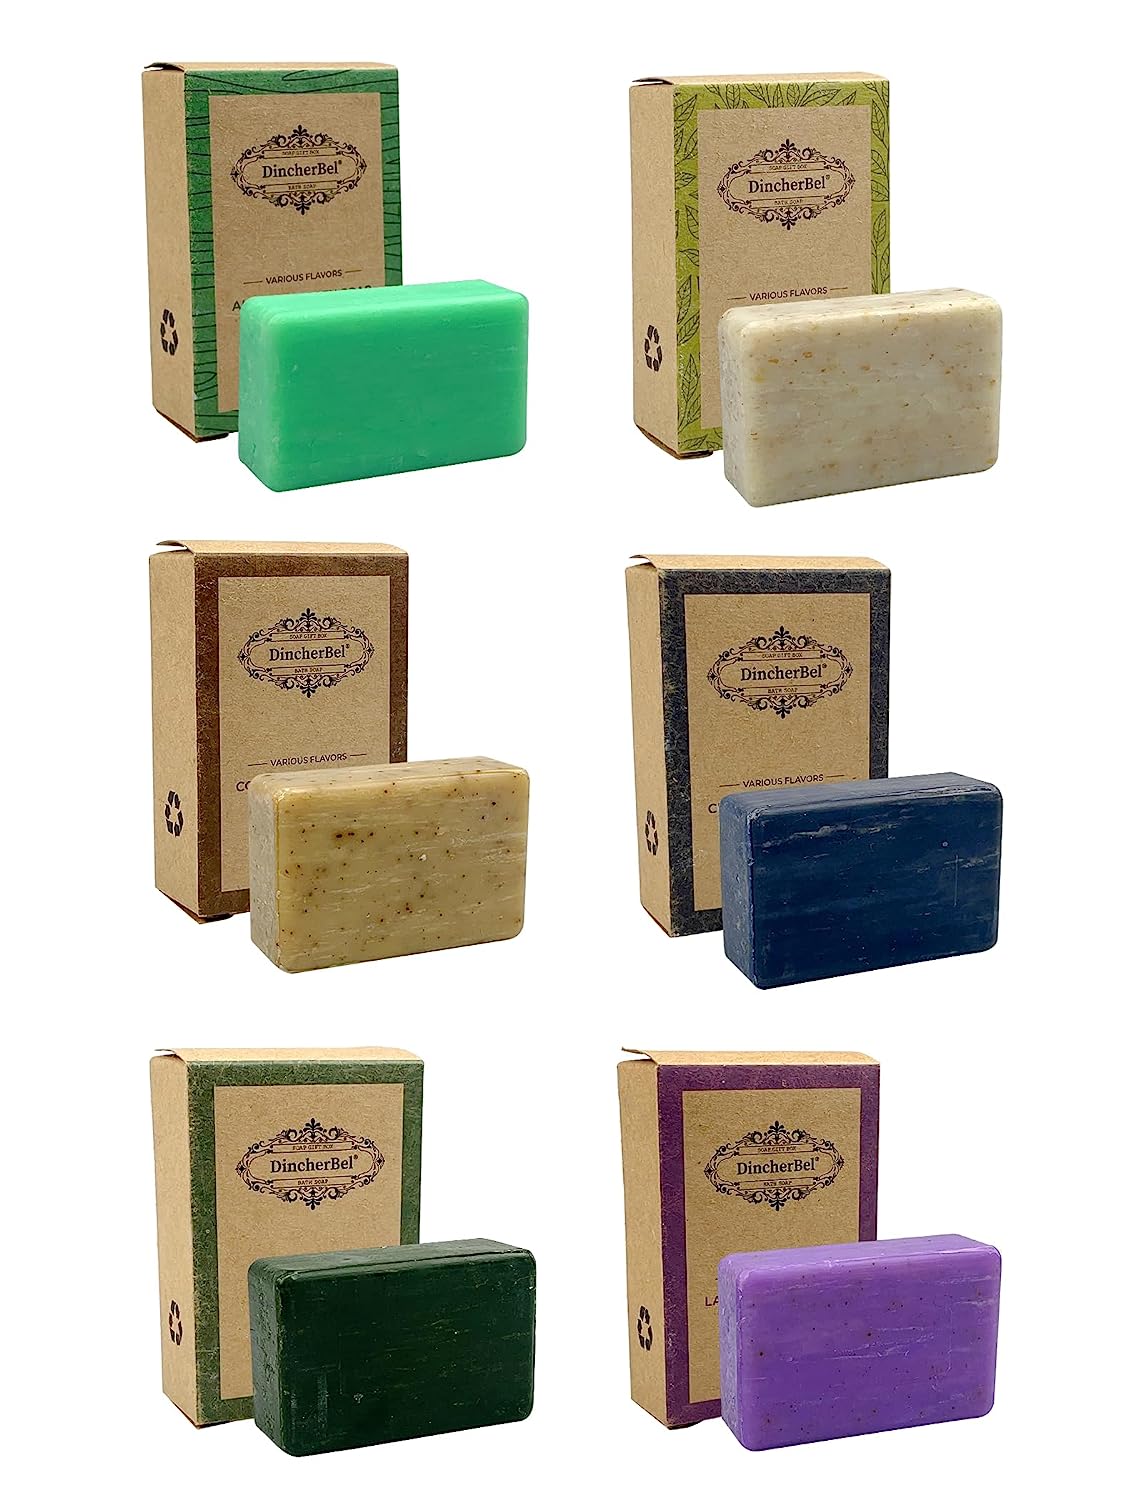 Natural Soap Bar - 6 Bars: Lavender, White Tea, Coconut Milk, Plant Essential Oil, Charcoal Oil Control and Aloe Mint, 4 Ounce Bars (Pack of 6)